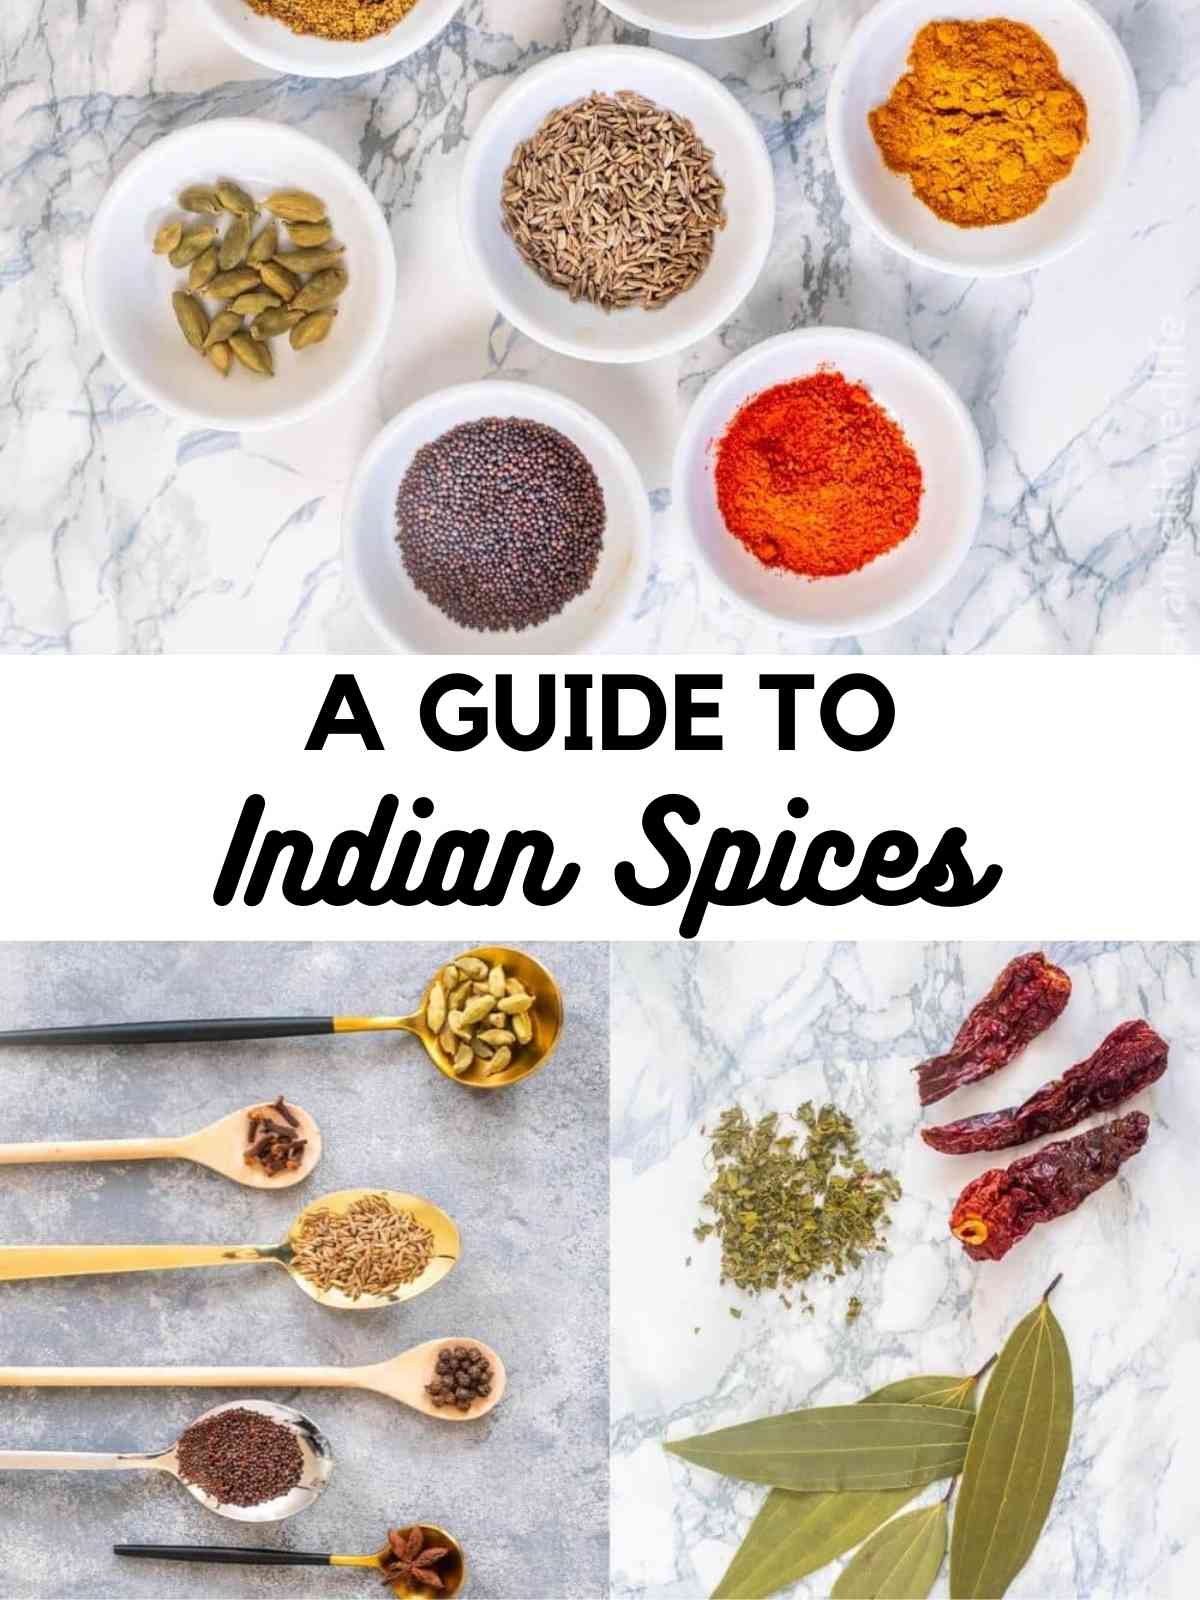 7 Indian spices, fresh herbs and whole spices for Indian cooking